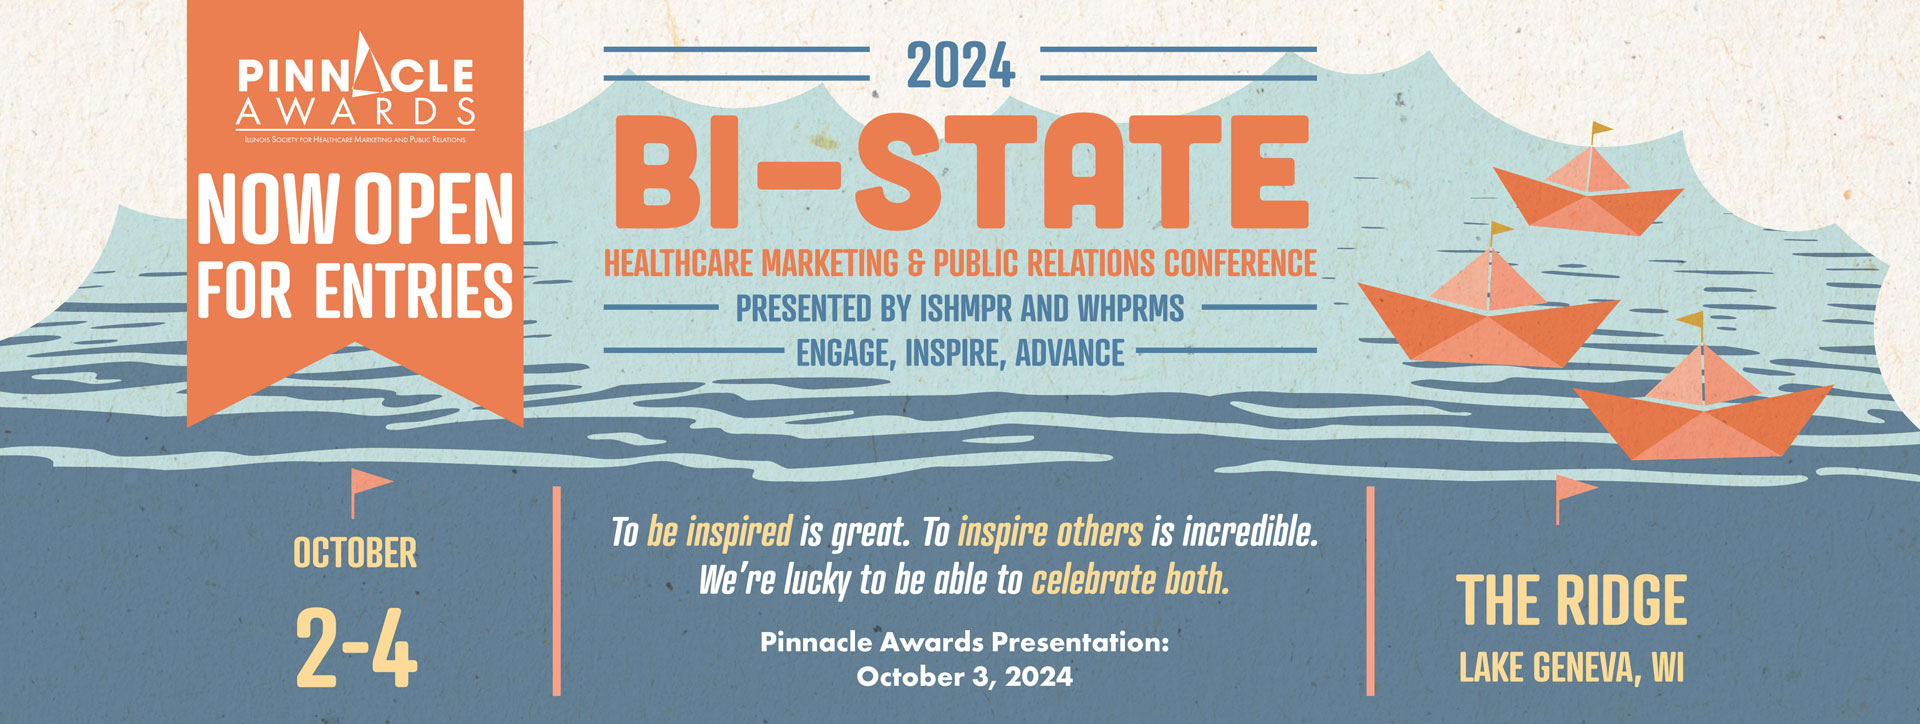 2024 Bi-State Healthcare Marketing & Public Relations Conference